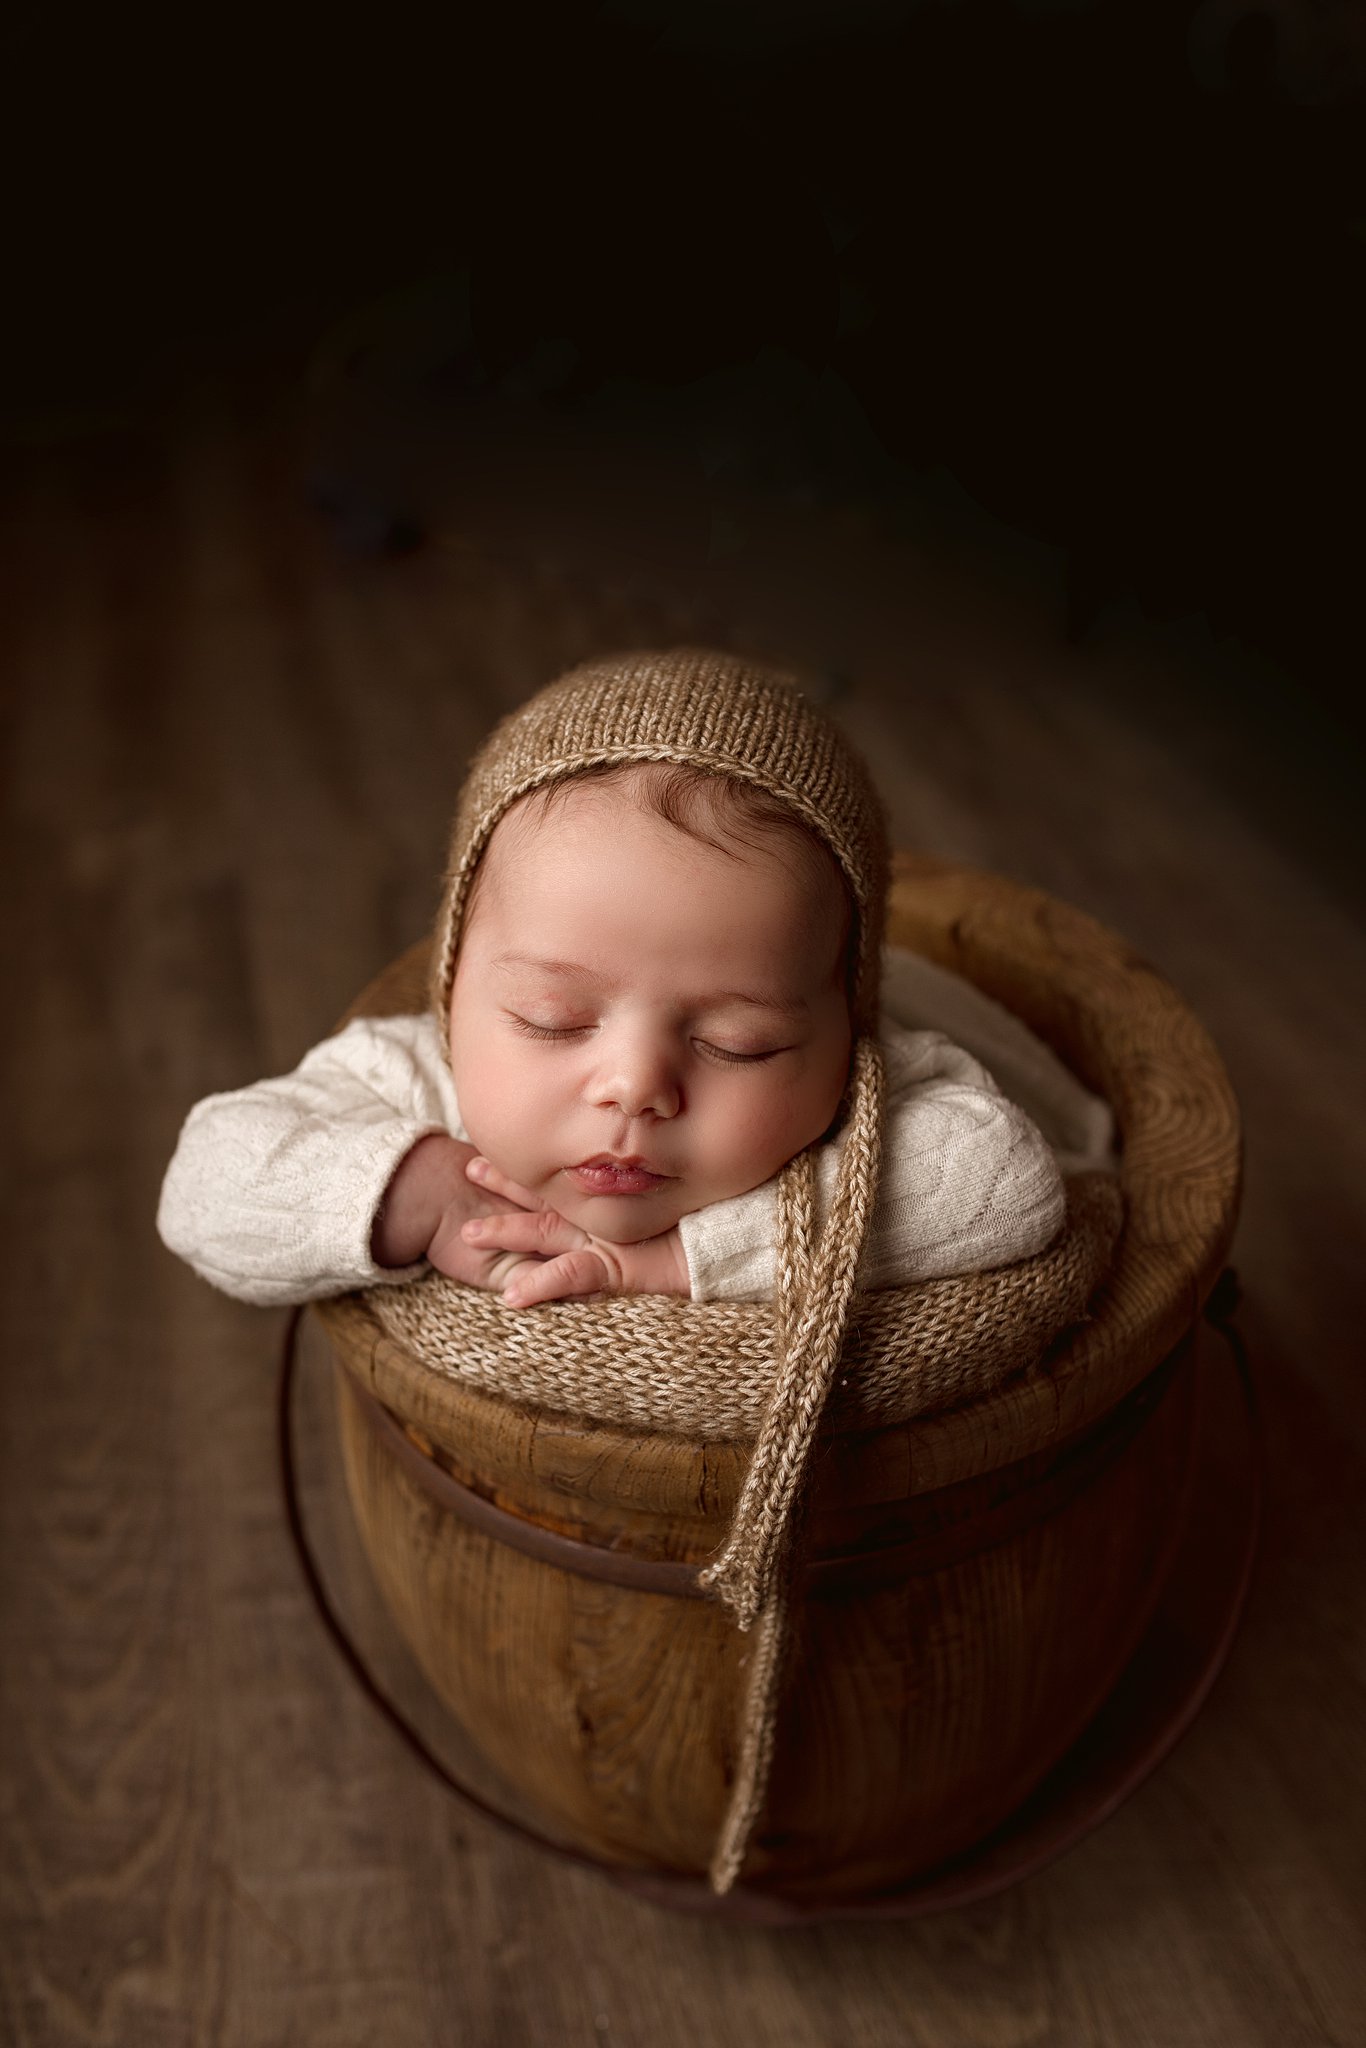 A newborn baby sleeps in a wooden bucket with head on its hands in a white sweater and brown knit hat diaper service toronto